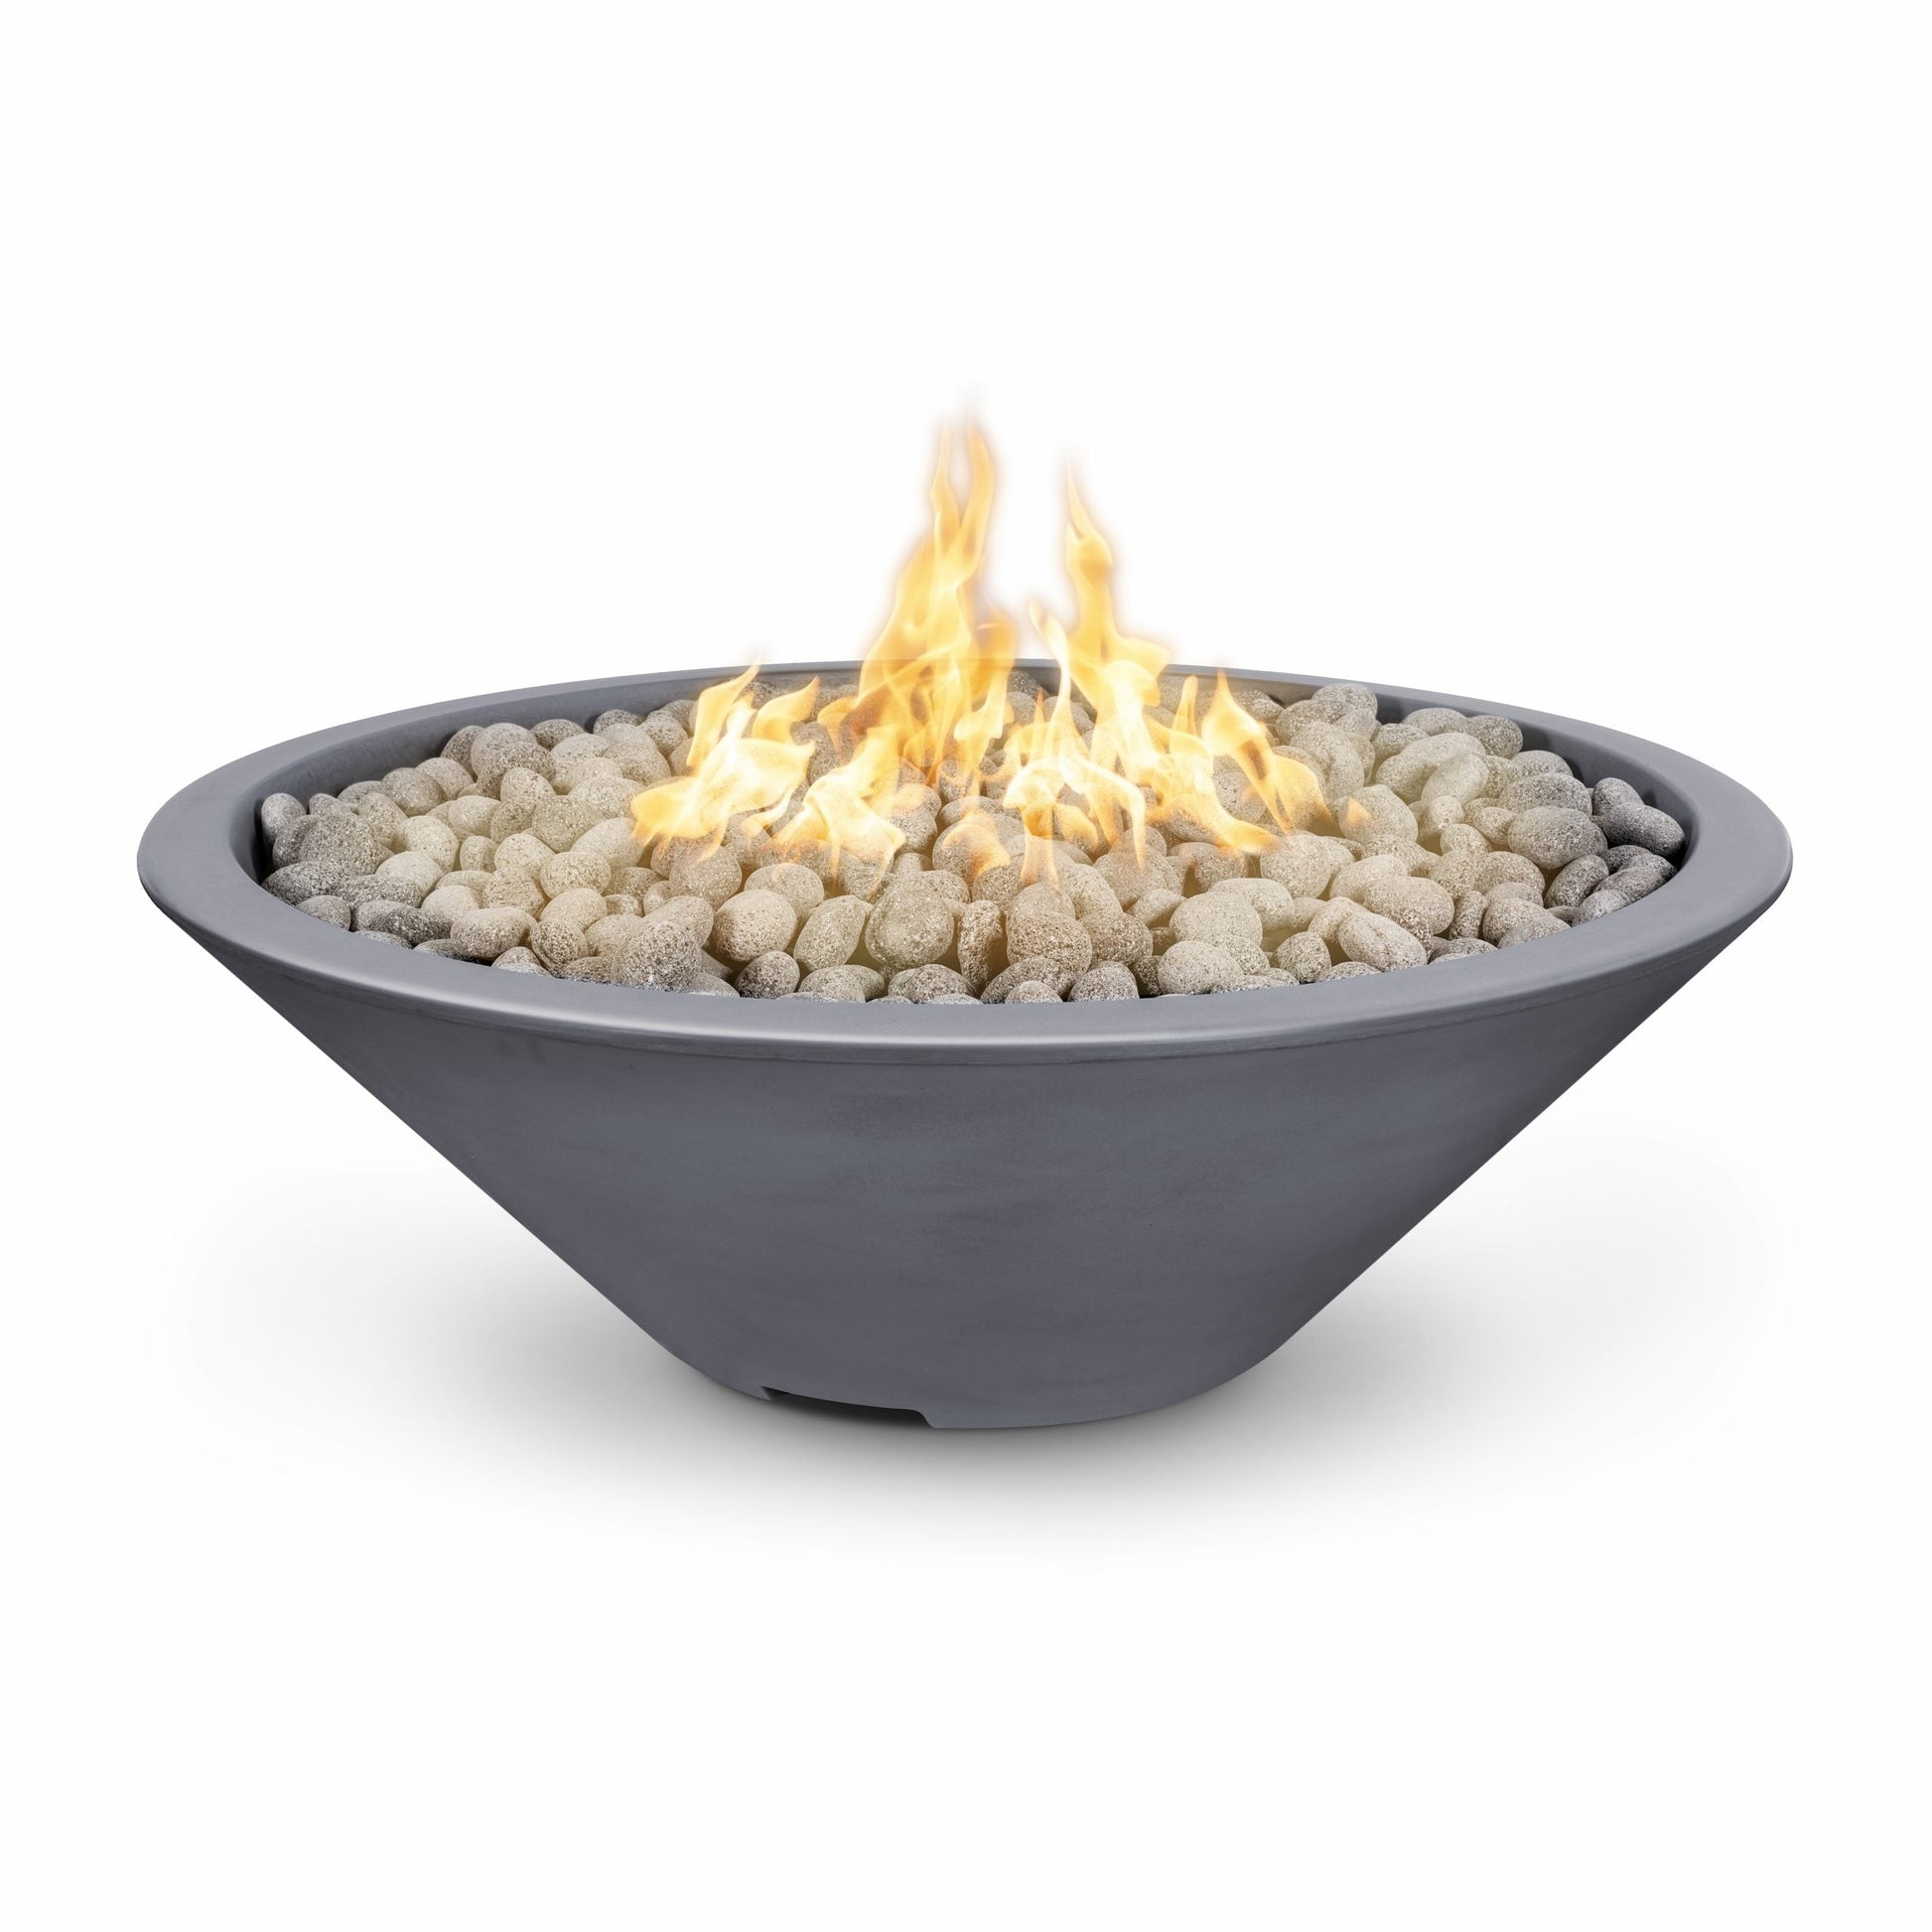 The Outdoor Plus Round Cazo 60" White Powder Coated Metal Liquid Propane Fire Pit with Flame Sense with Spark Ignition